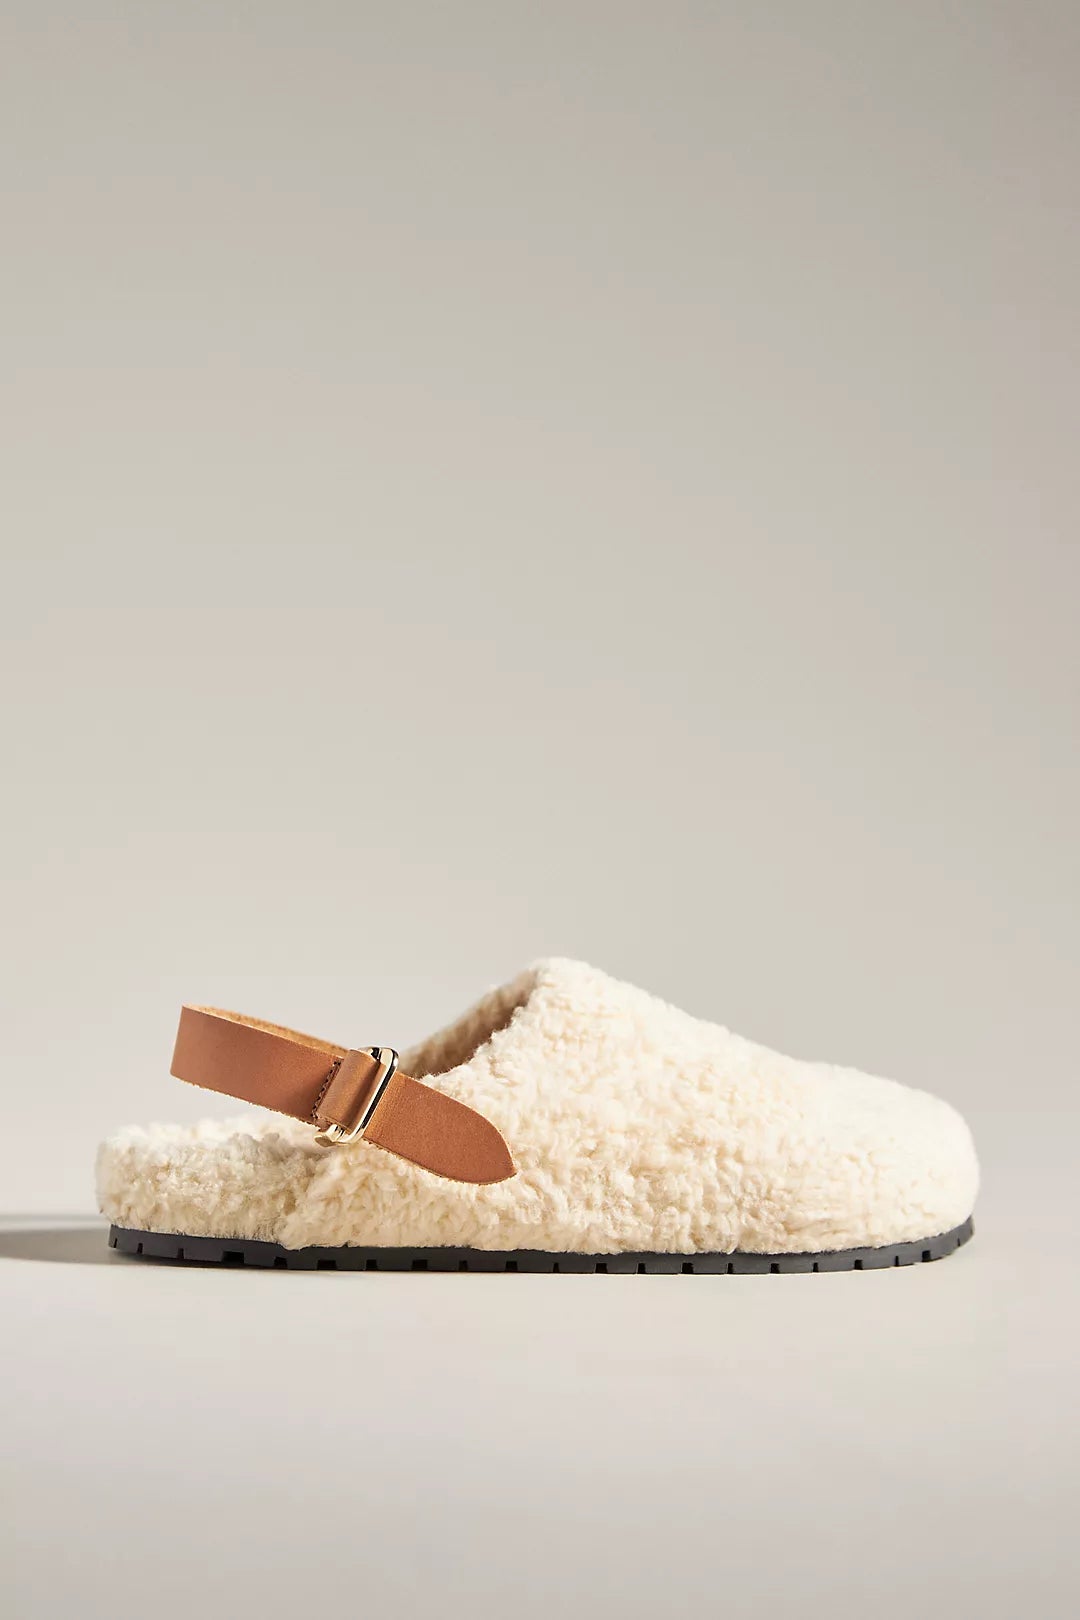 Got my hands on the Target ugg slipper they released this year and com... |  ugg | TikTok